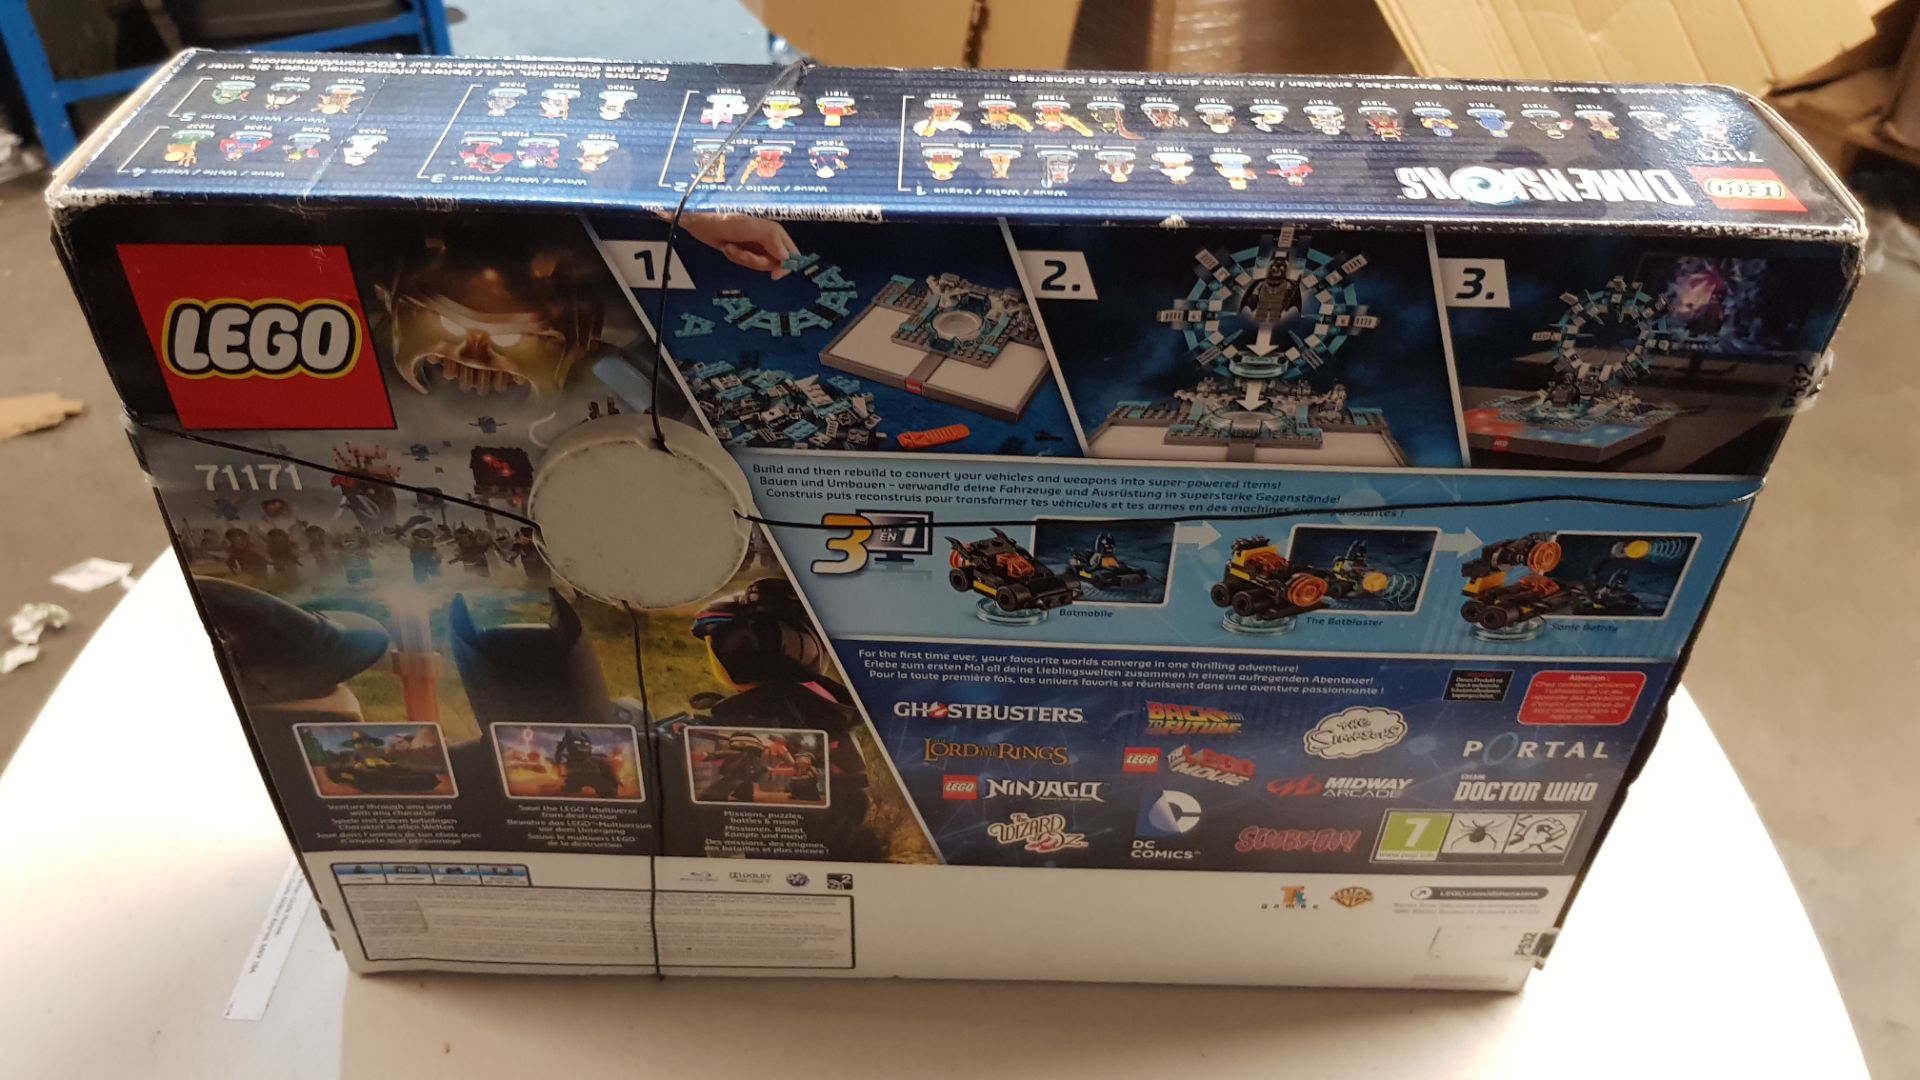 (R14B) 1x PS4 Lego Dimensions Starter Pack (71171). New, Sealed Item – Currently £133 Amazon. Sligh - Image 4 of 6